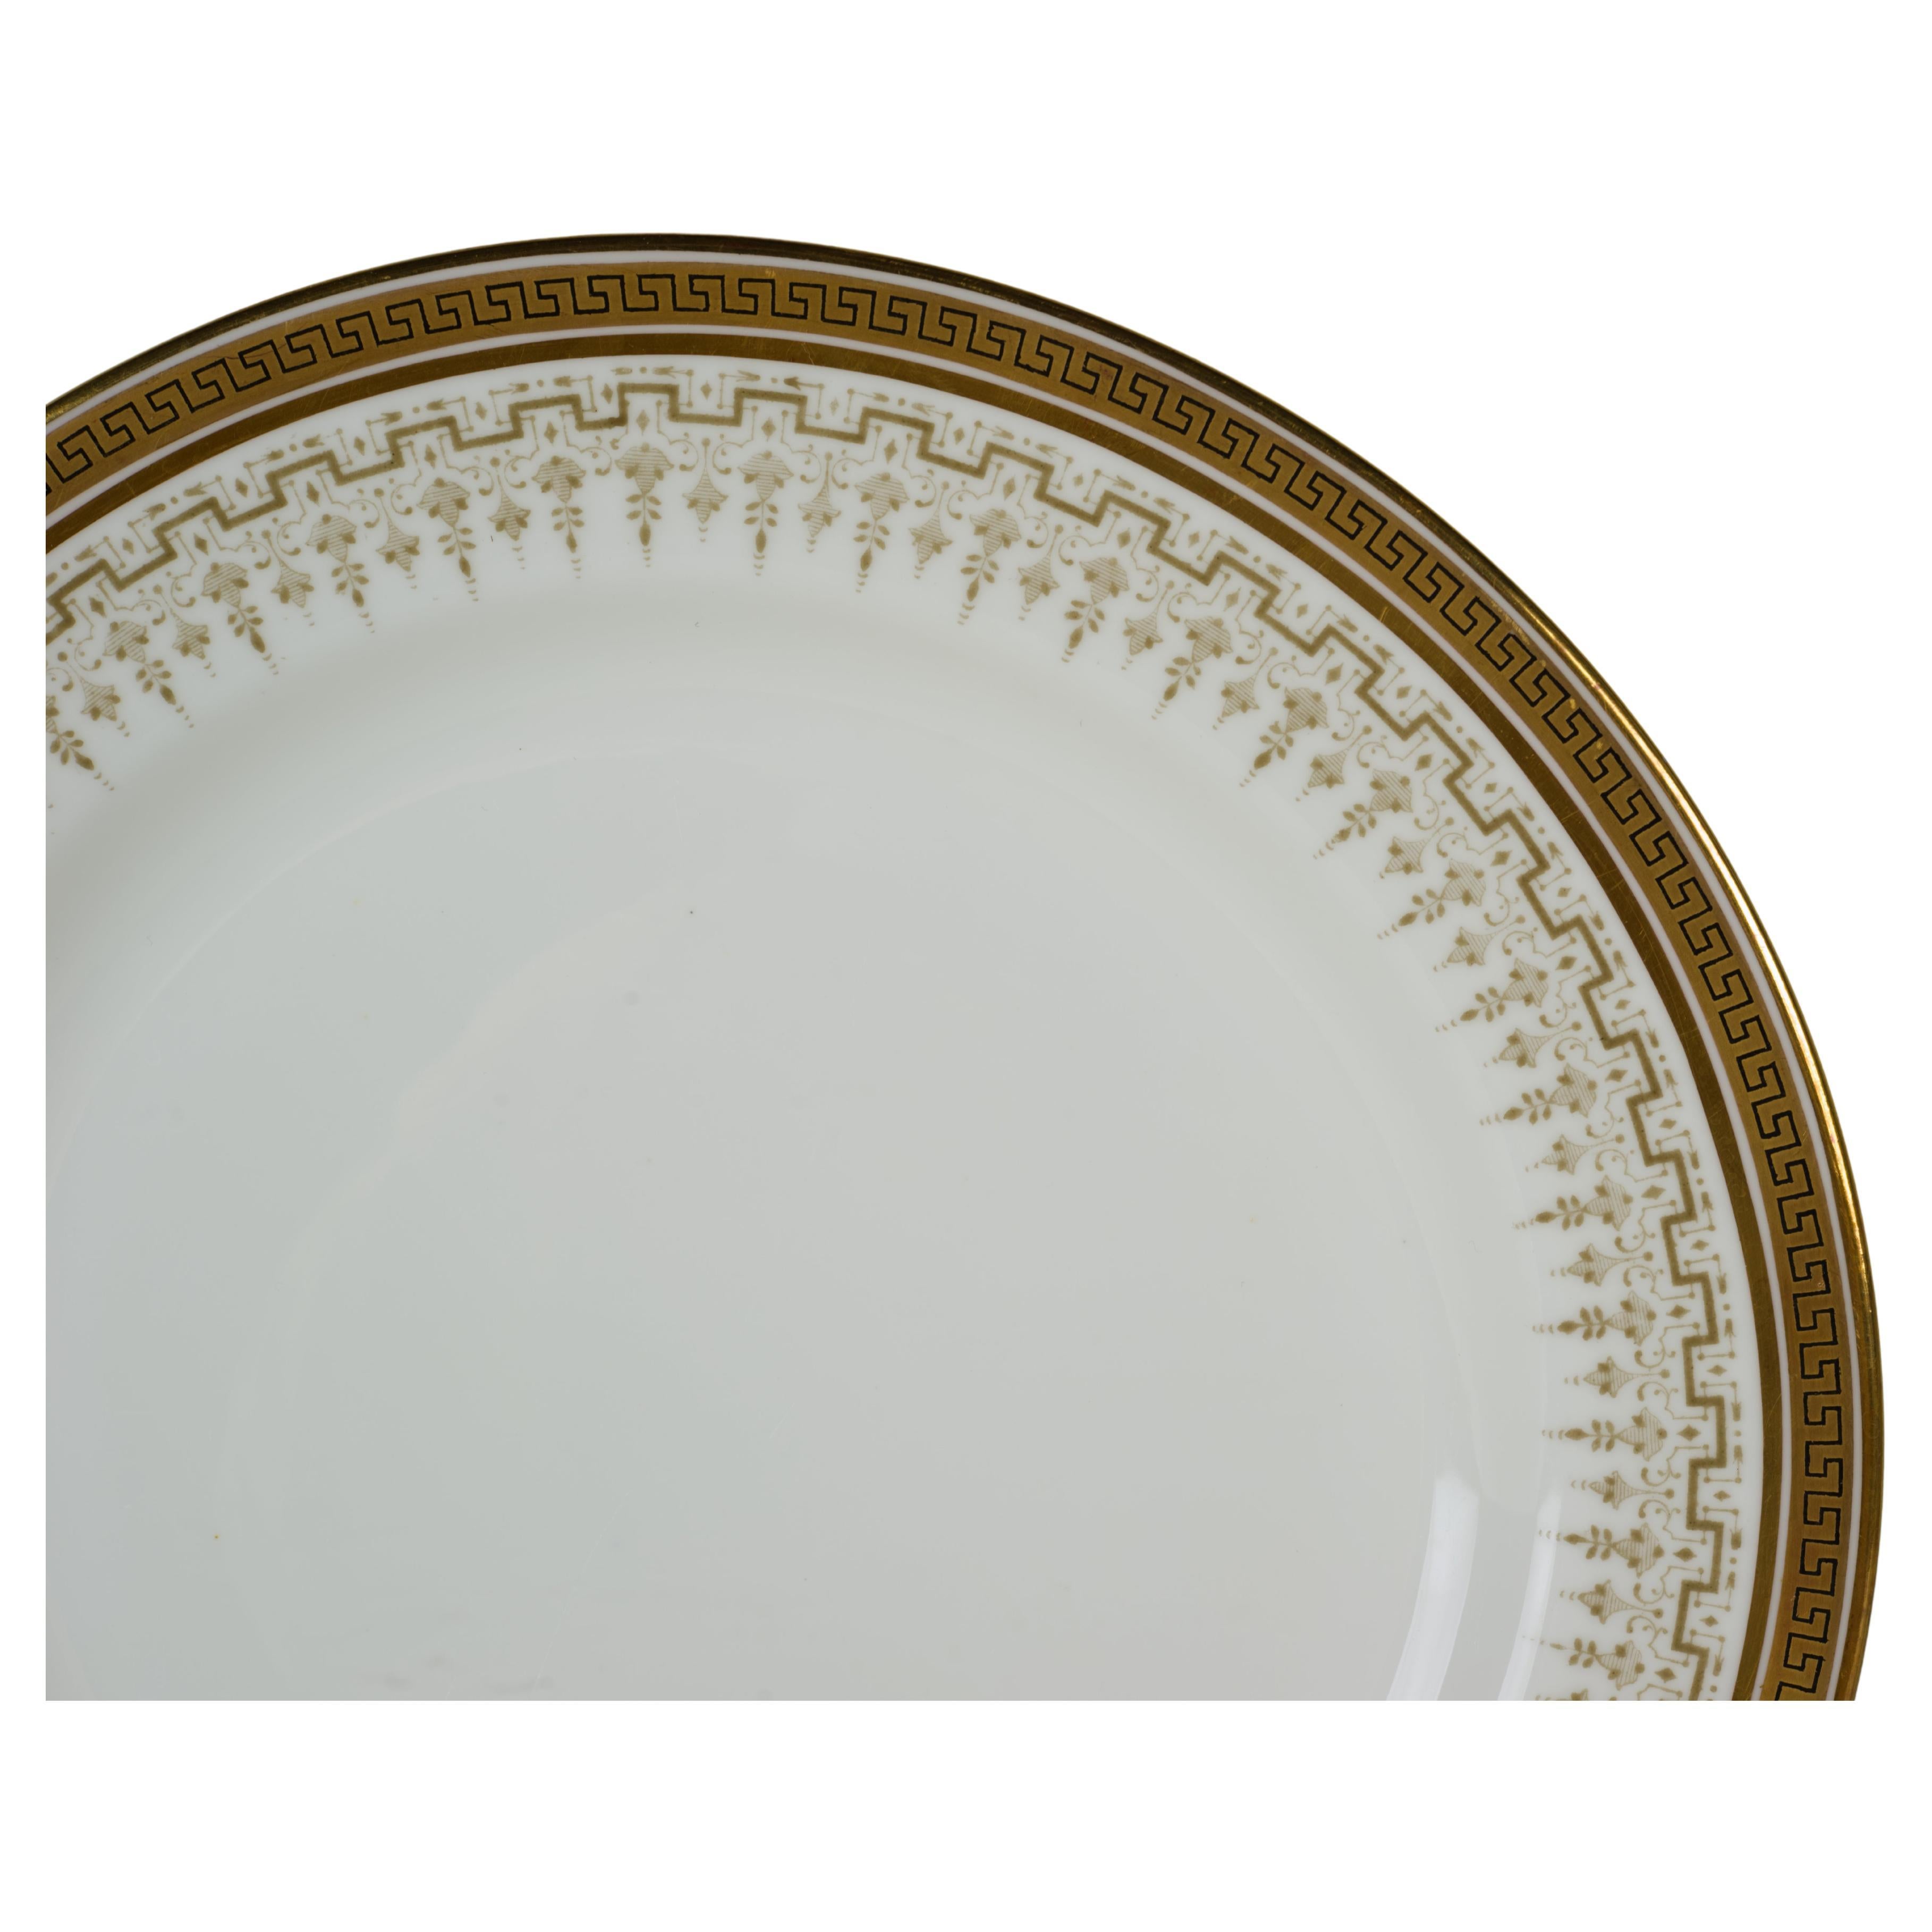 
Up for your consideration is the set of 6 luncheon plates made by Cauldon for Higgins & Seiter, New York. The plates are 